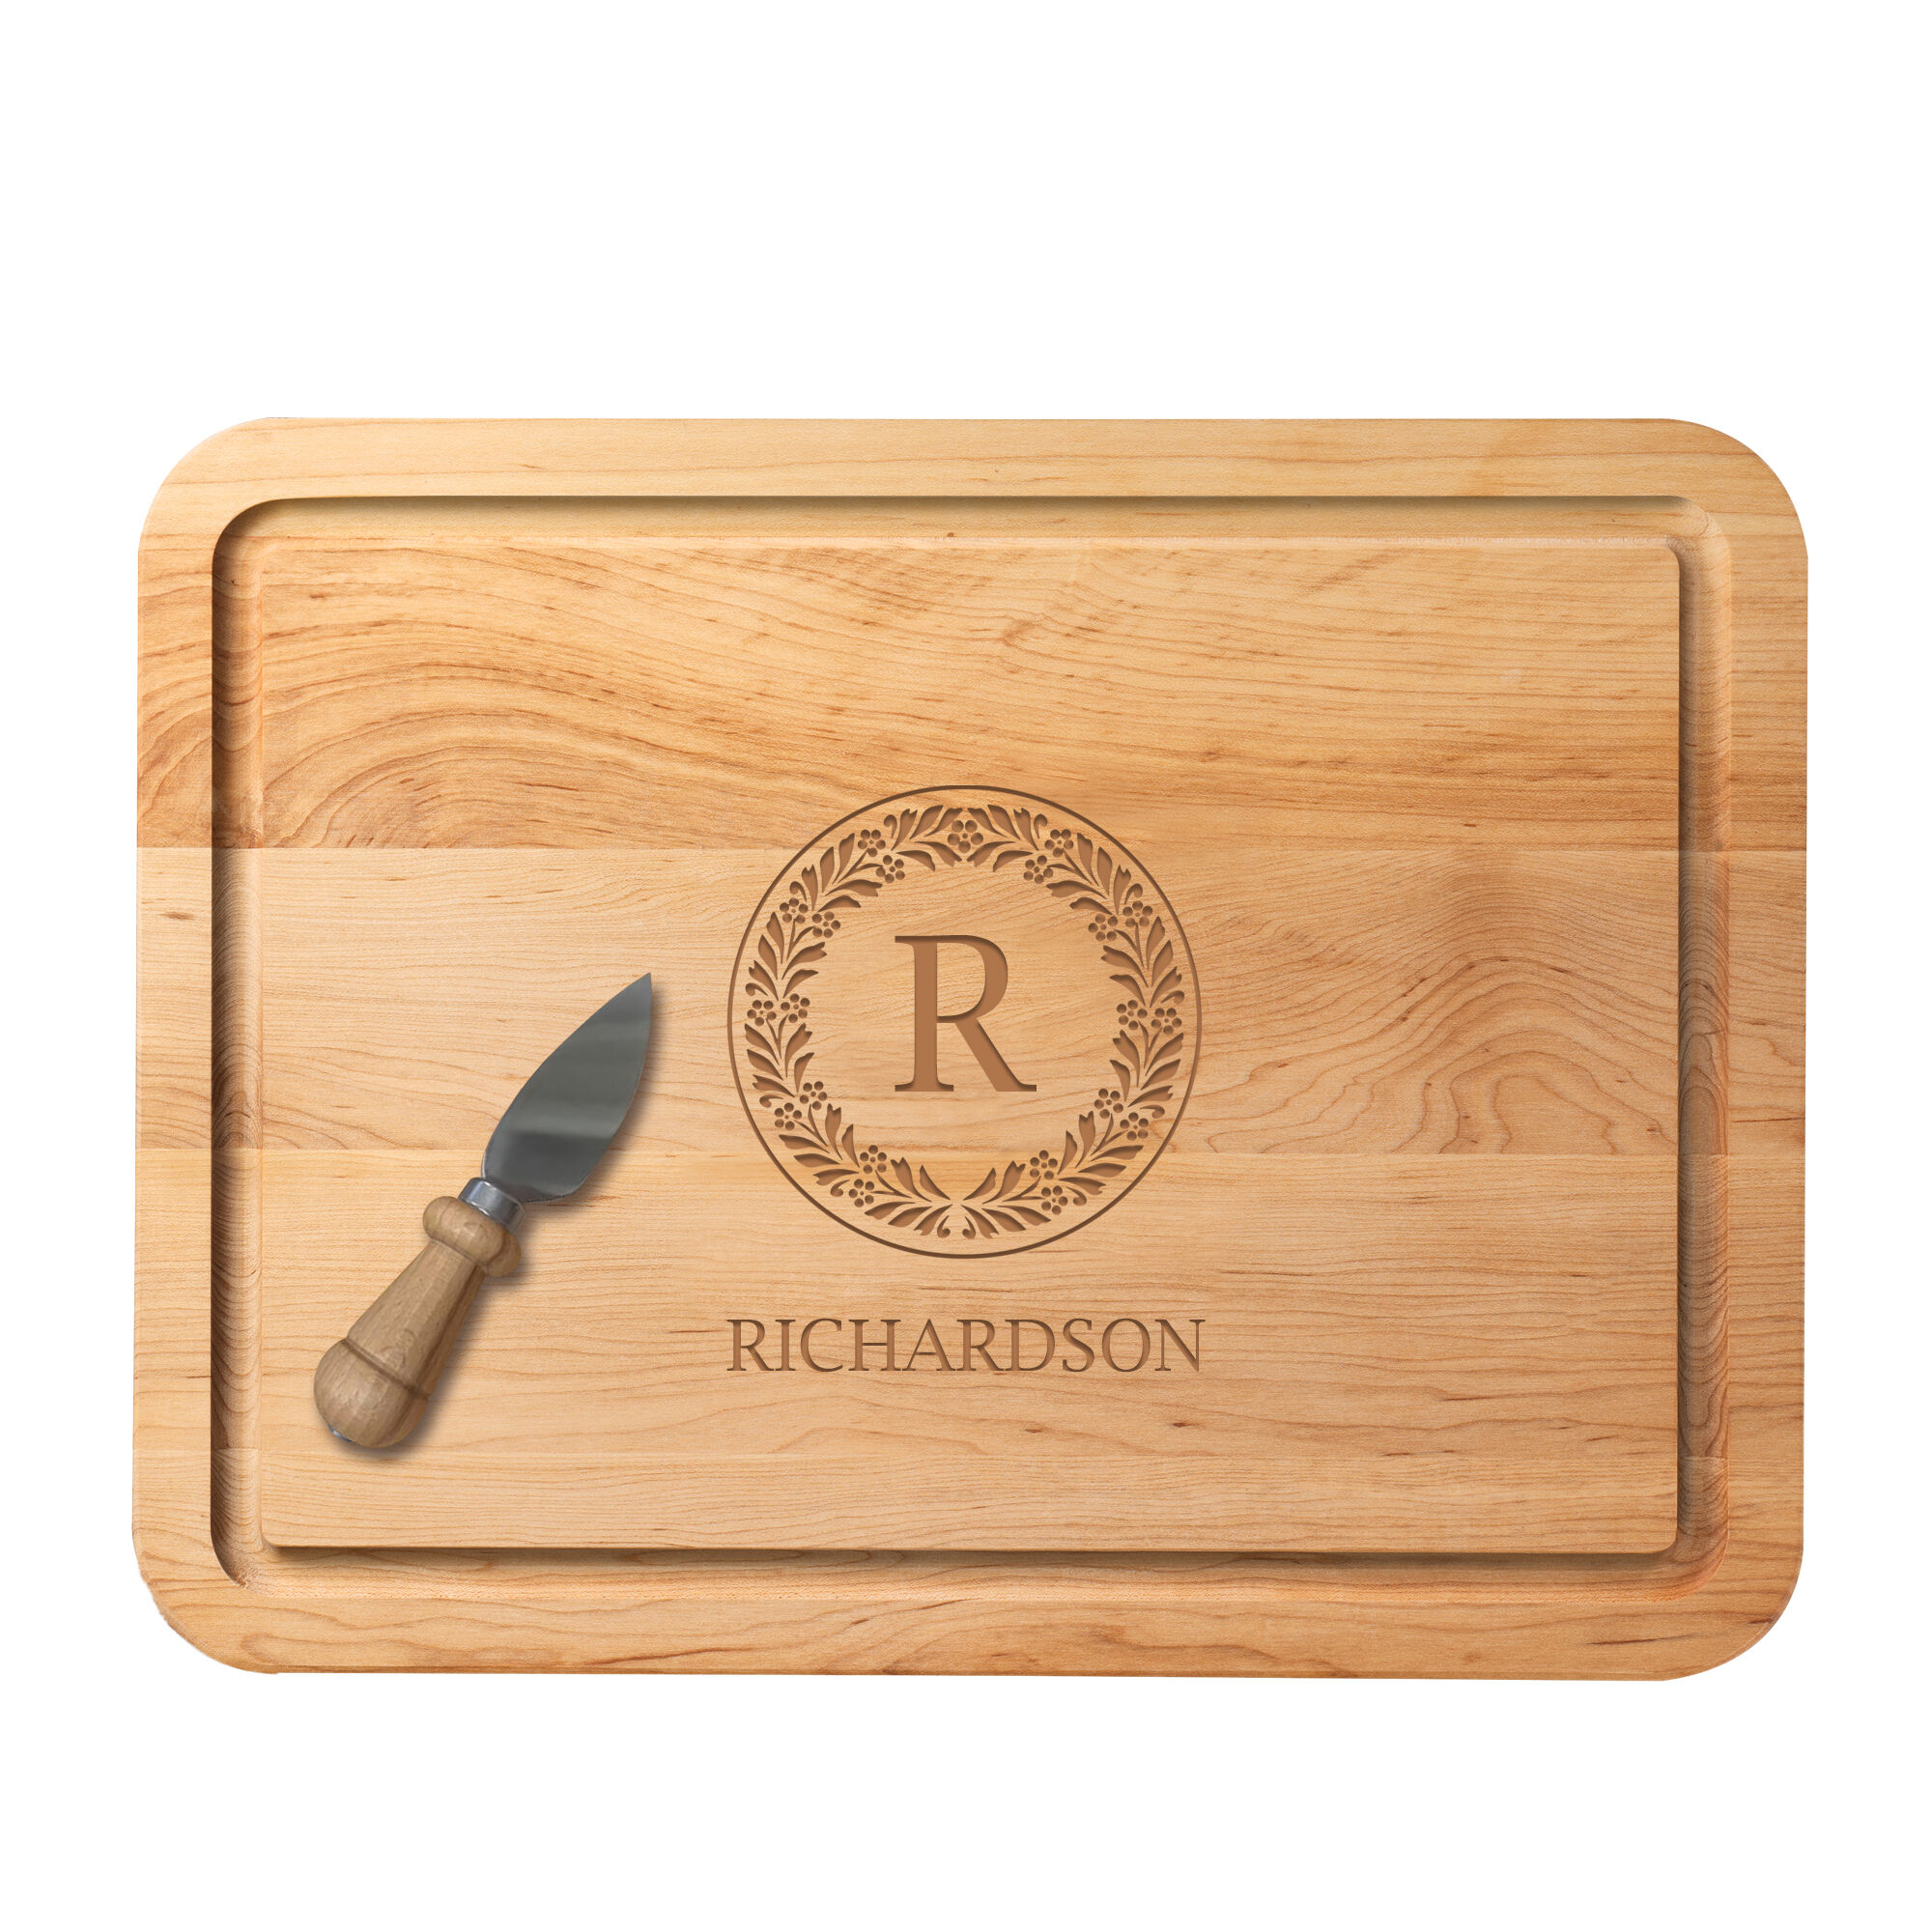 The Personalized Maple Cutting Board with Free Knife 1468 0037 a main